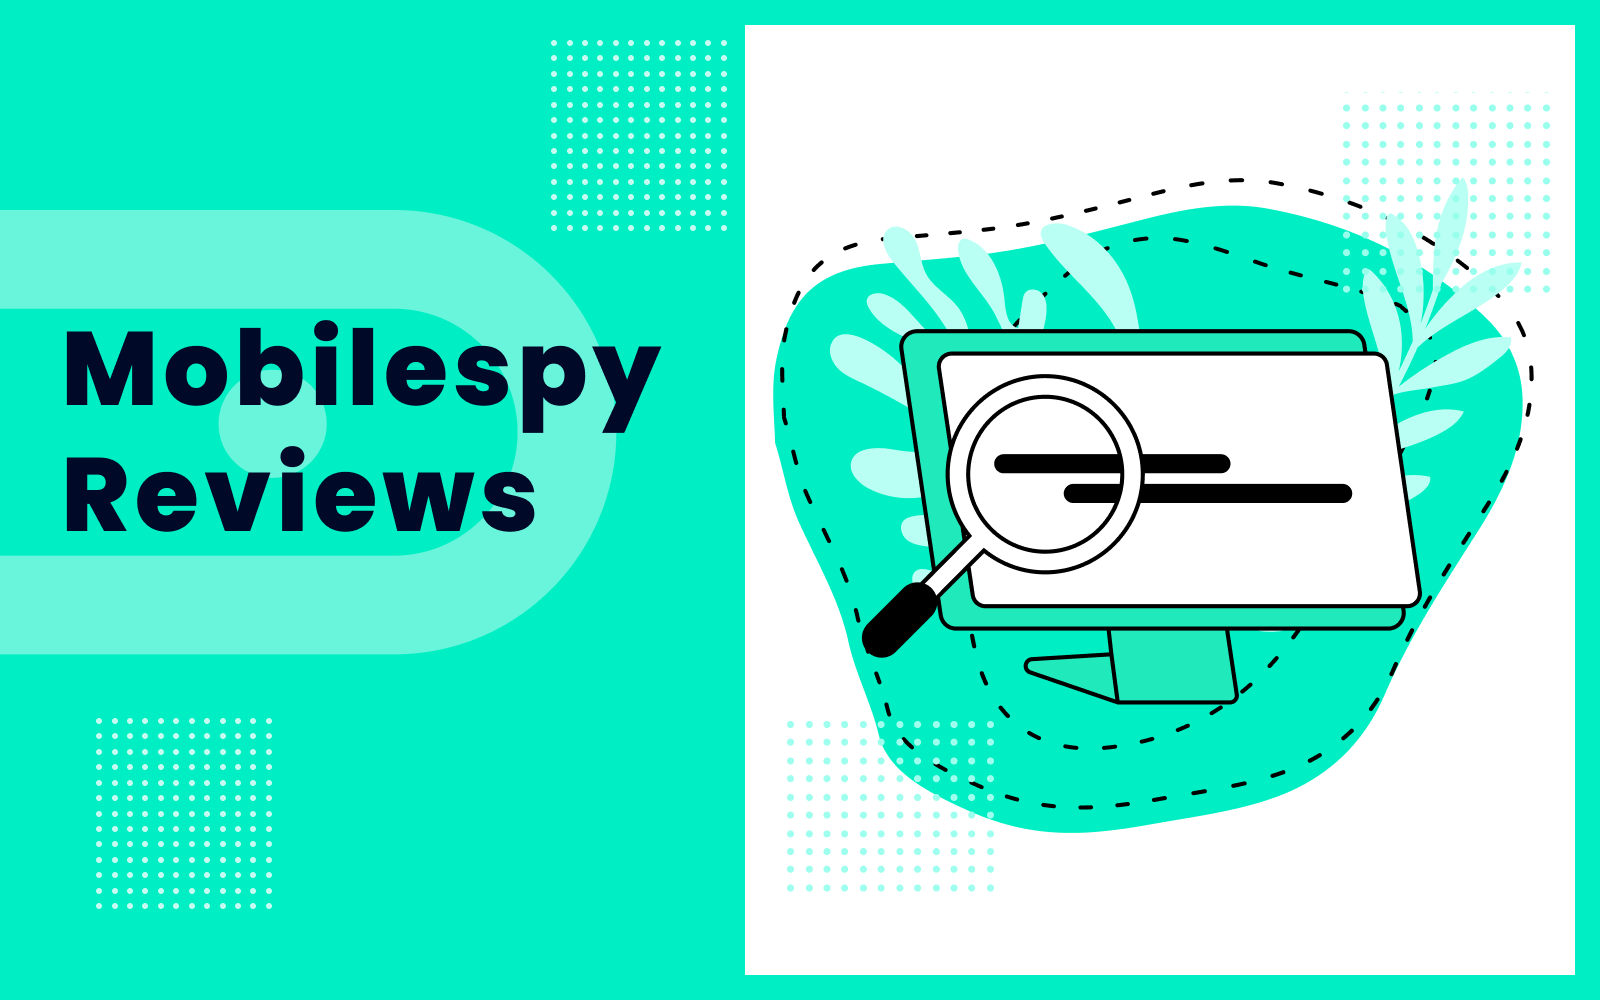 MobileSpy Reviews 2022: Features, Pros, Cons, and More